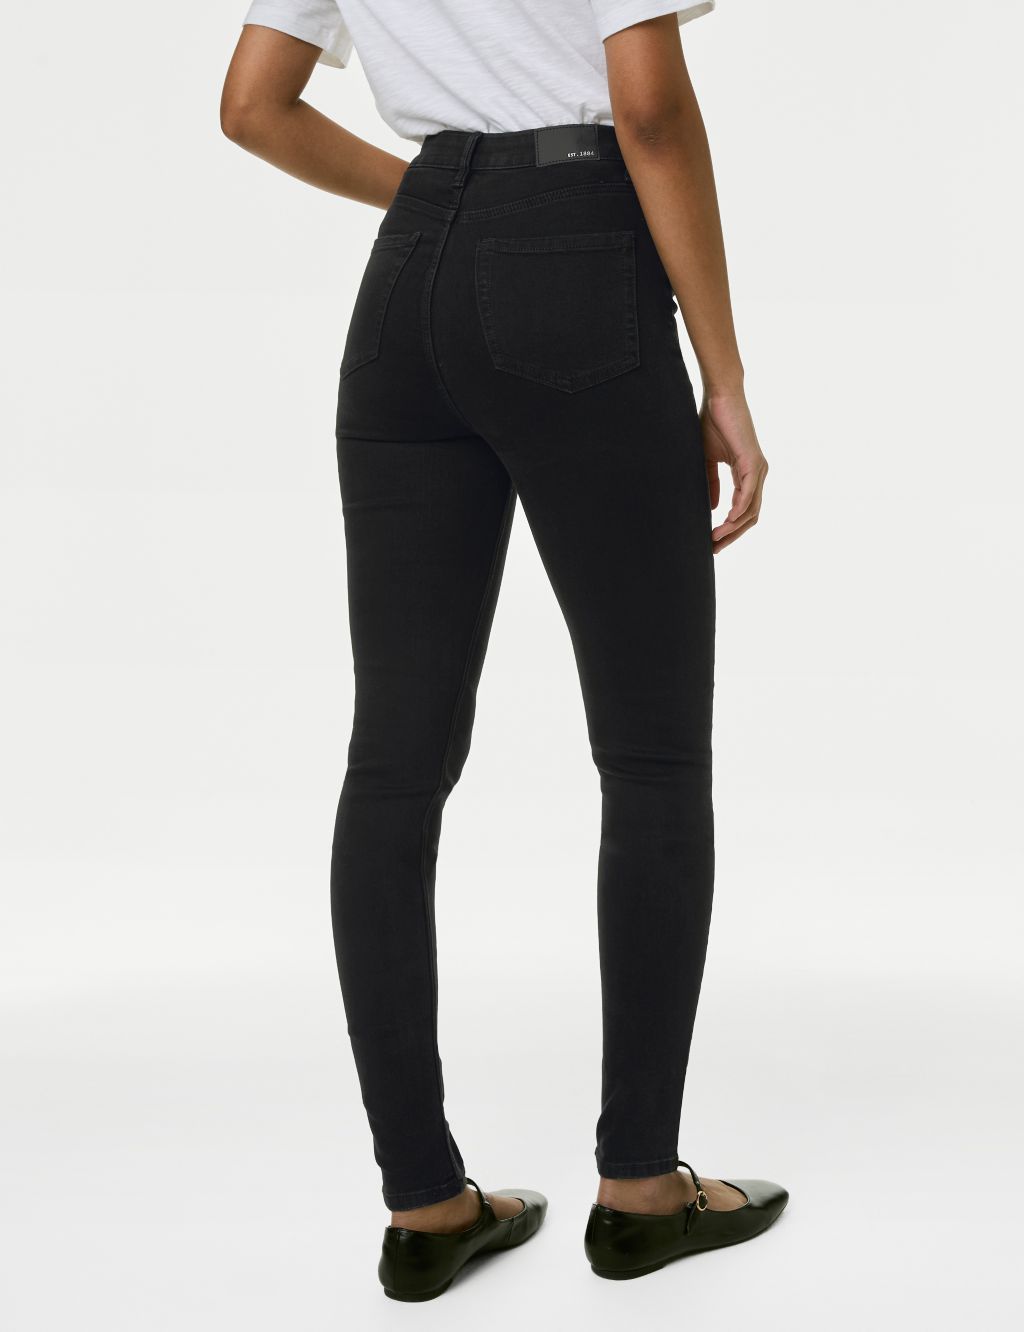 Ivy Supersoft High Waisted Skinny Jeans image 4